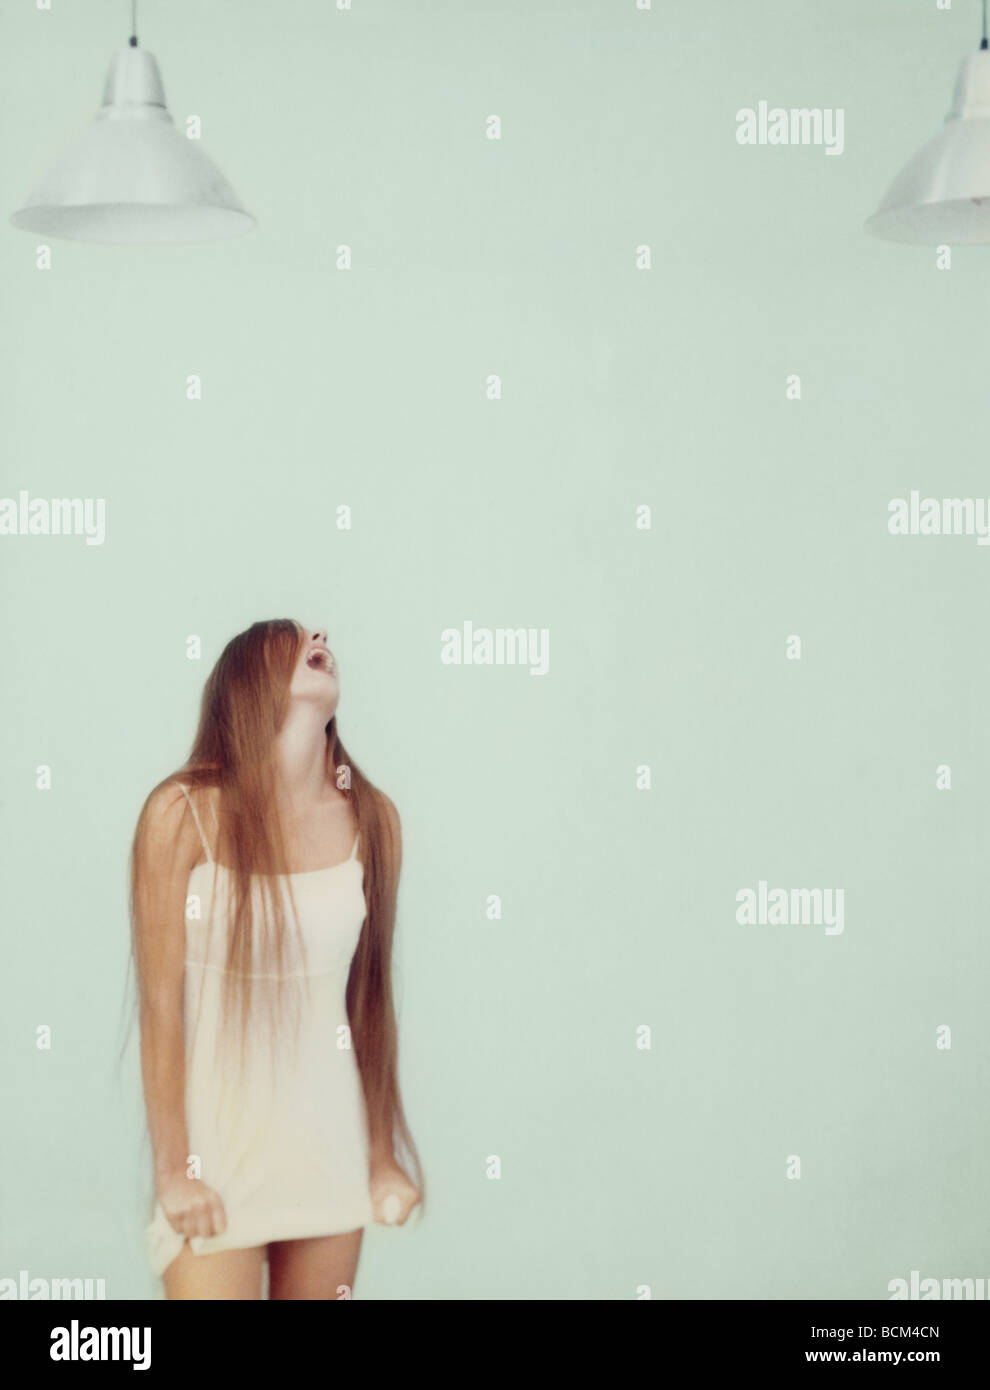 Young woman screaming, holding edge of dress Stock Photo